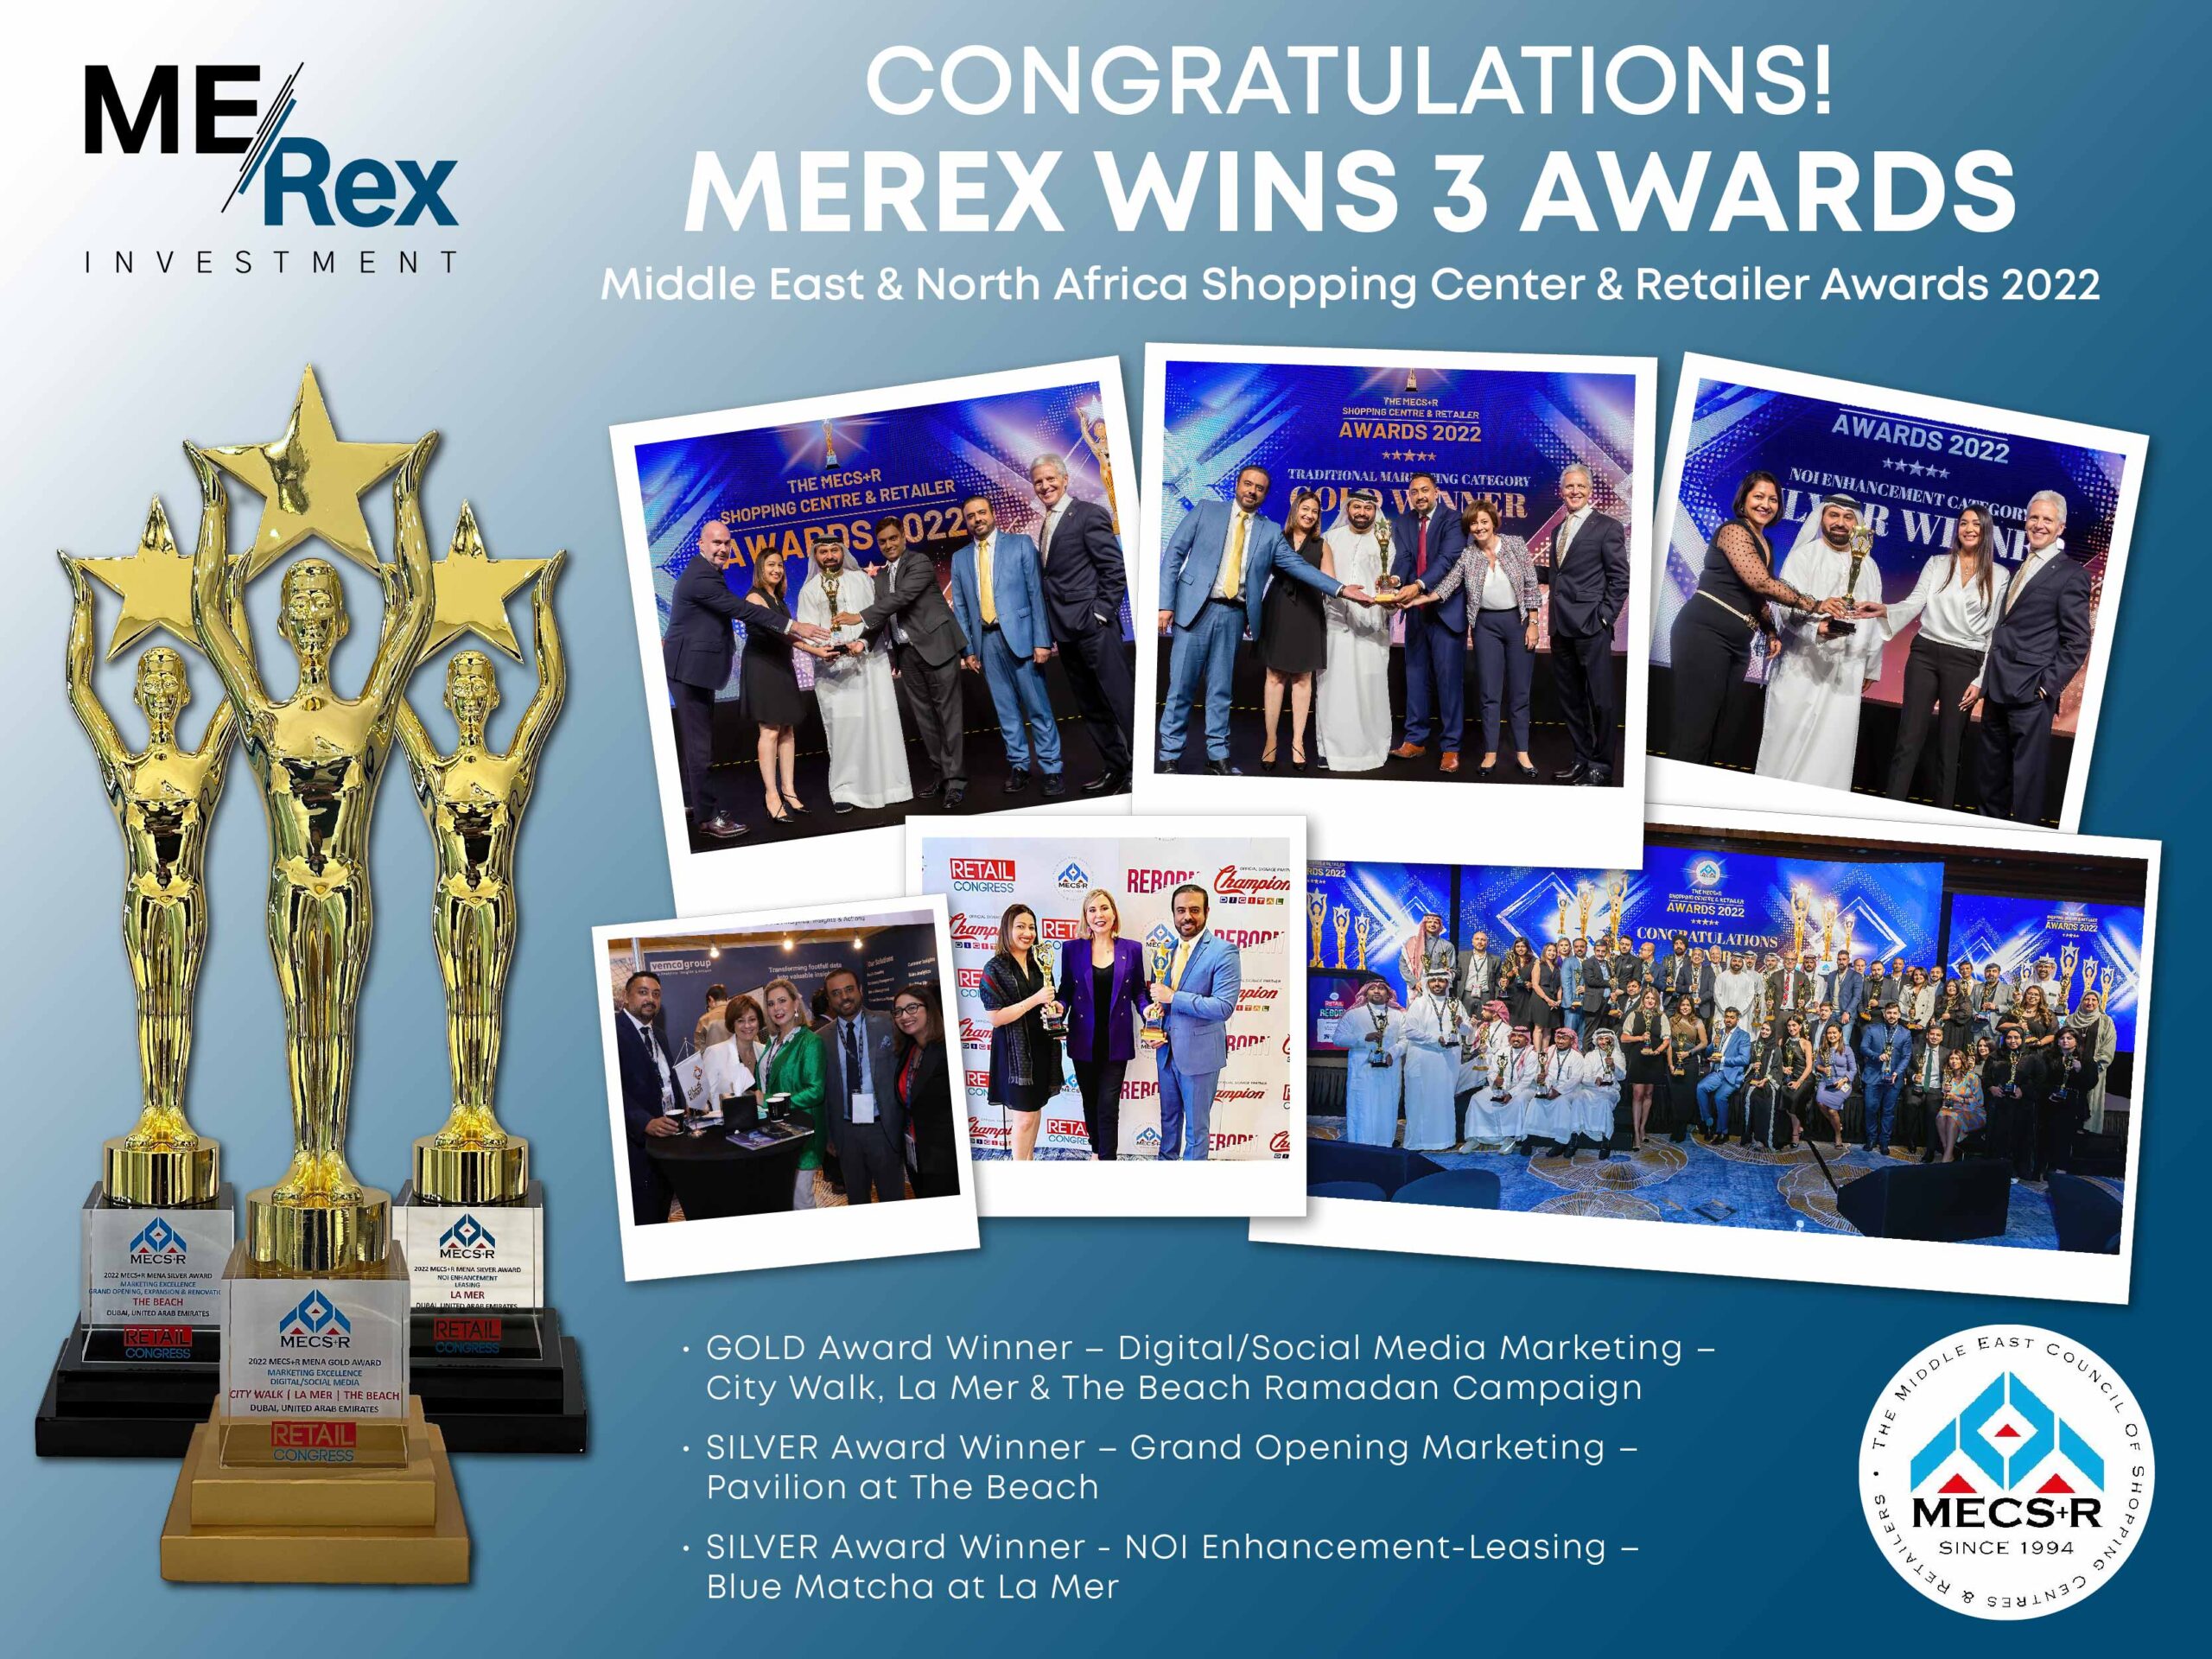 A photo collage of Merex receiving awards